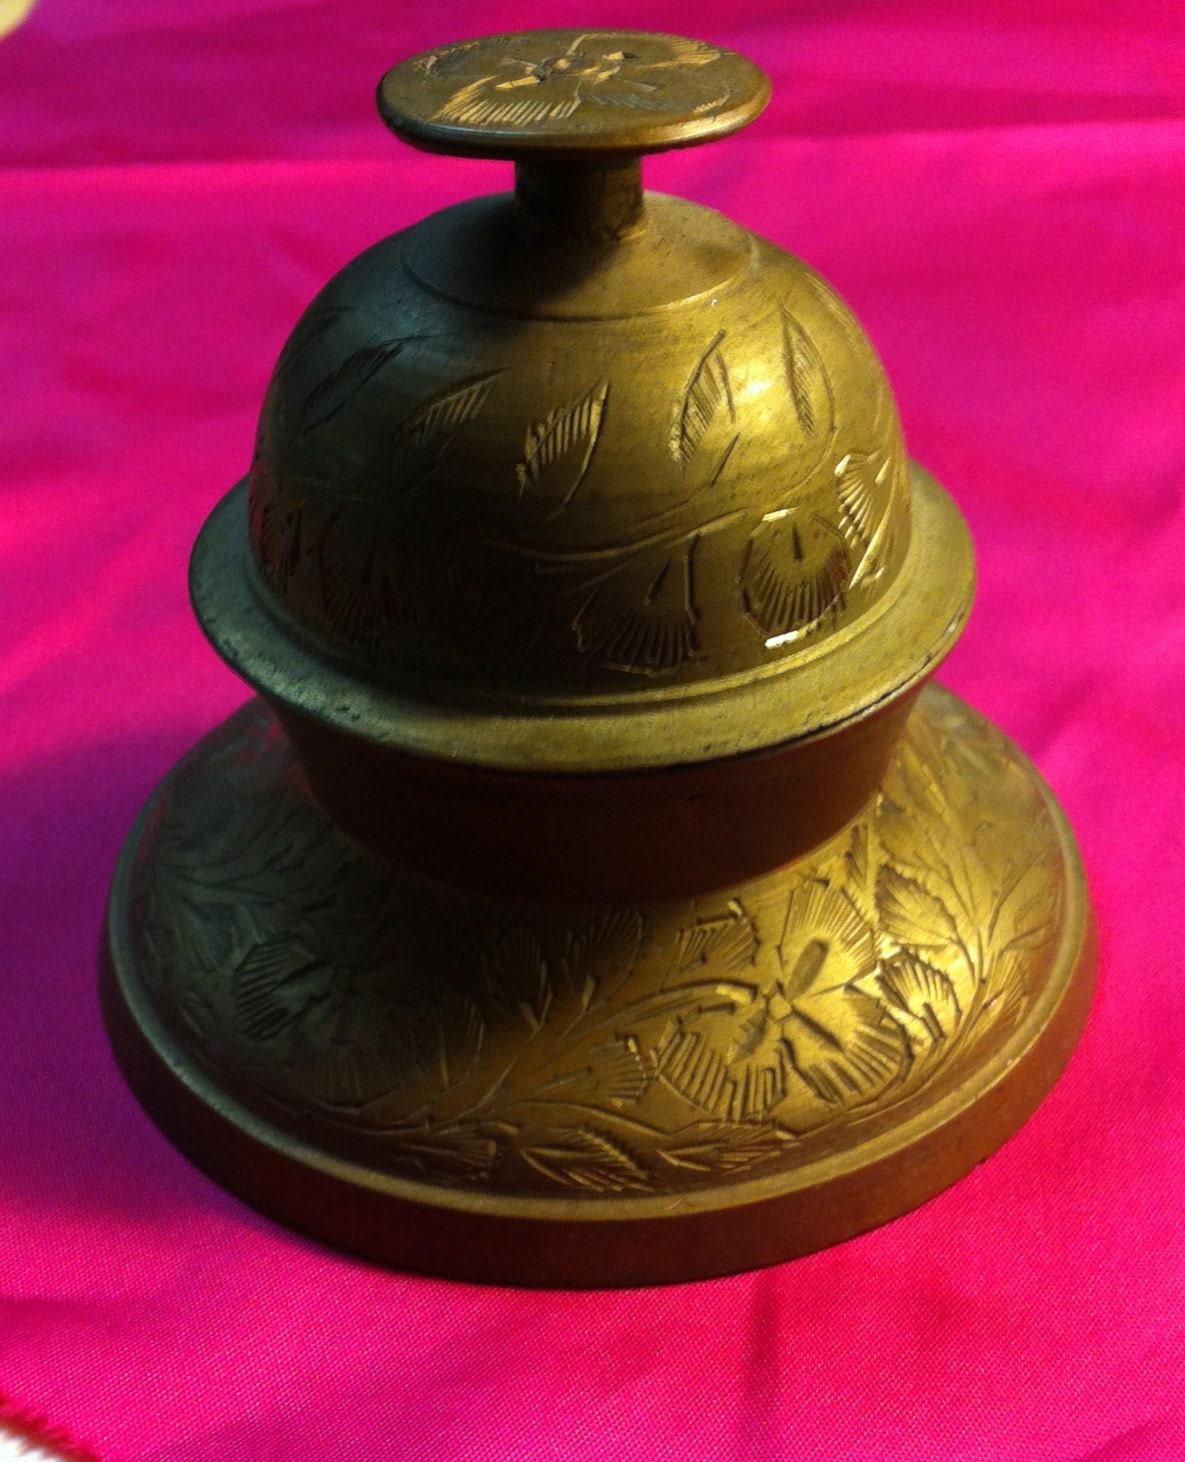 Antique Brass Indian Bell by HUEisit on Etsy